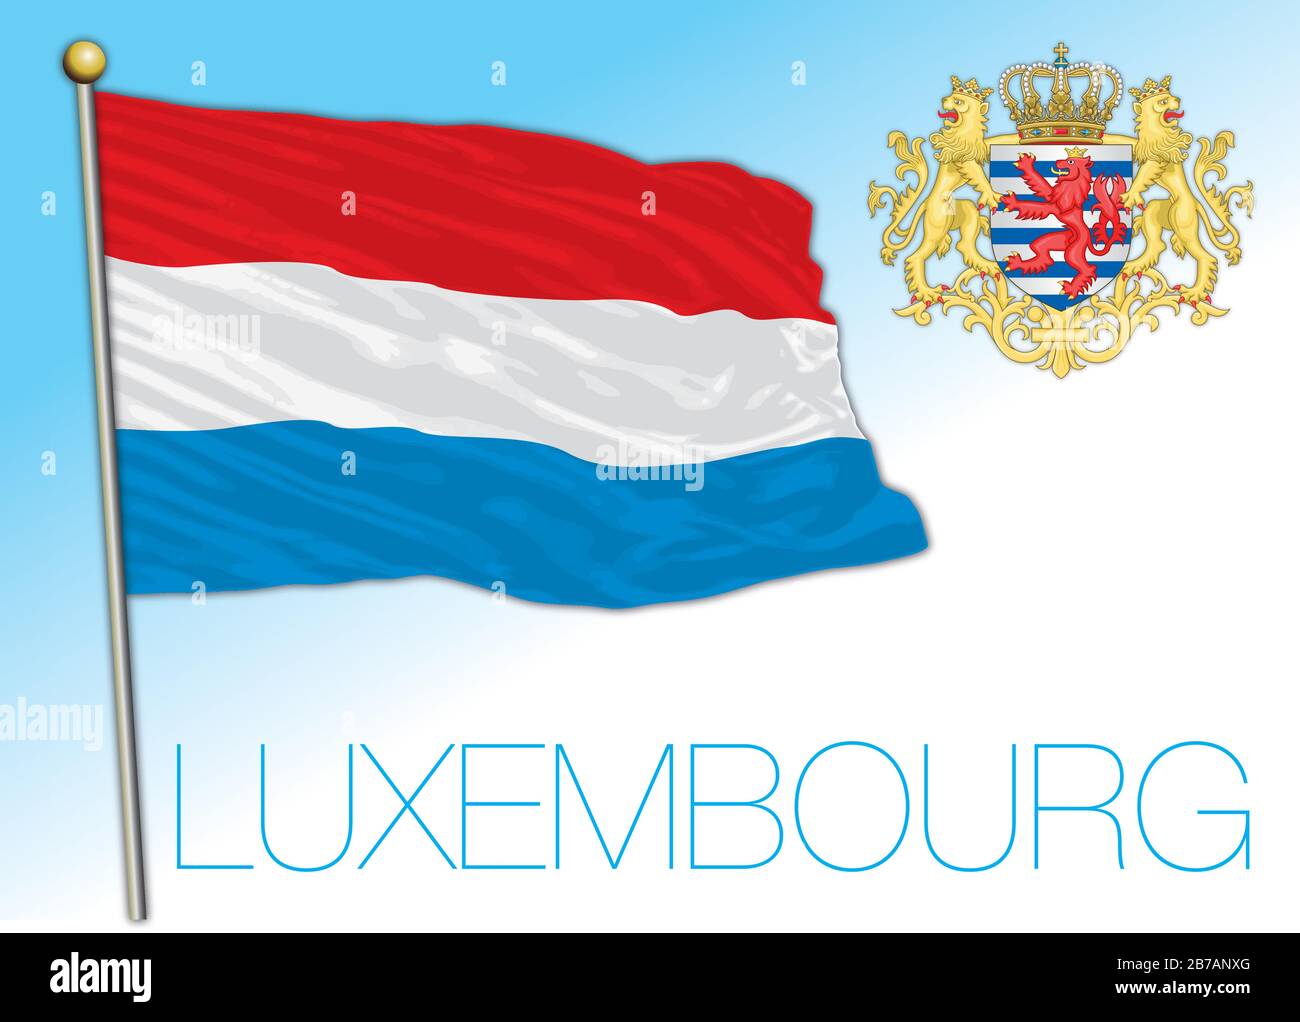 Luxembourg official national flag and coat of arms, European Union, vector illustration Stock Vector